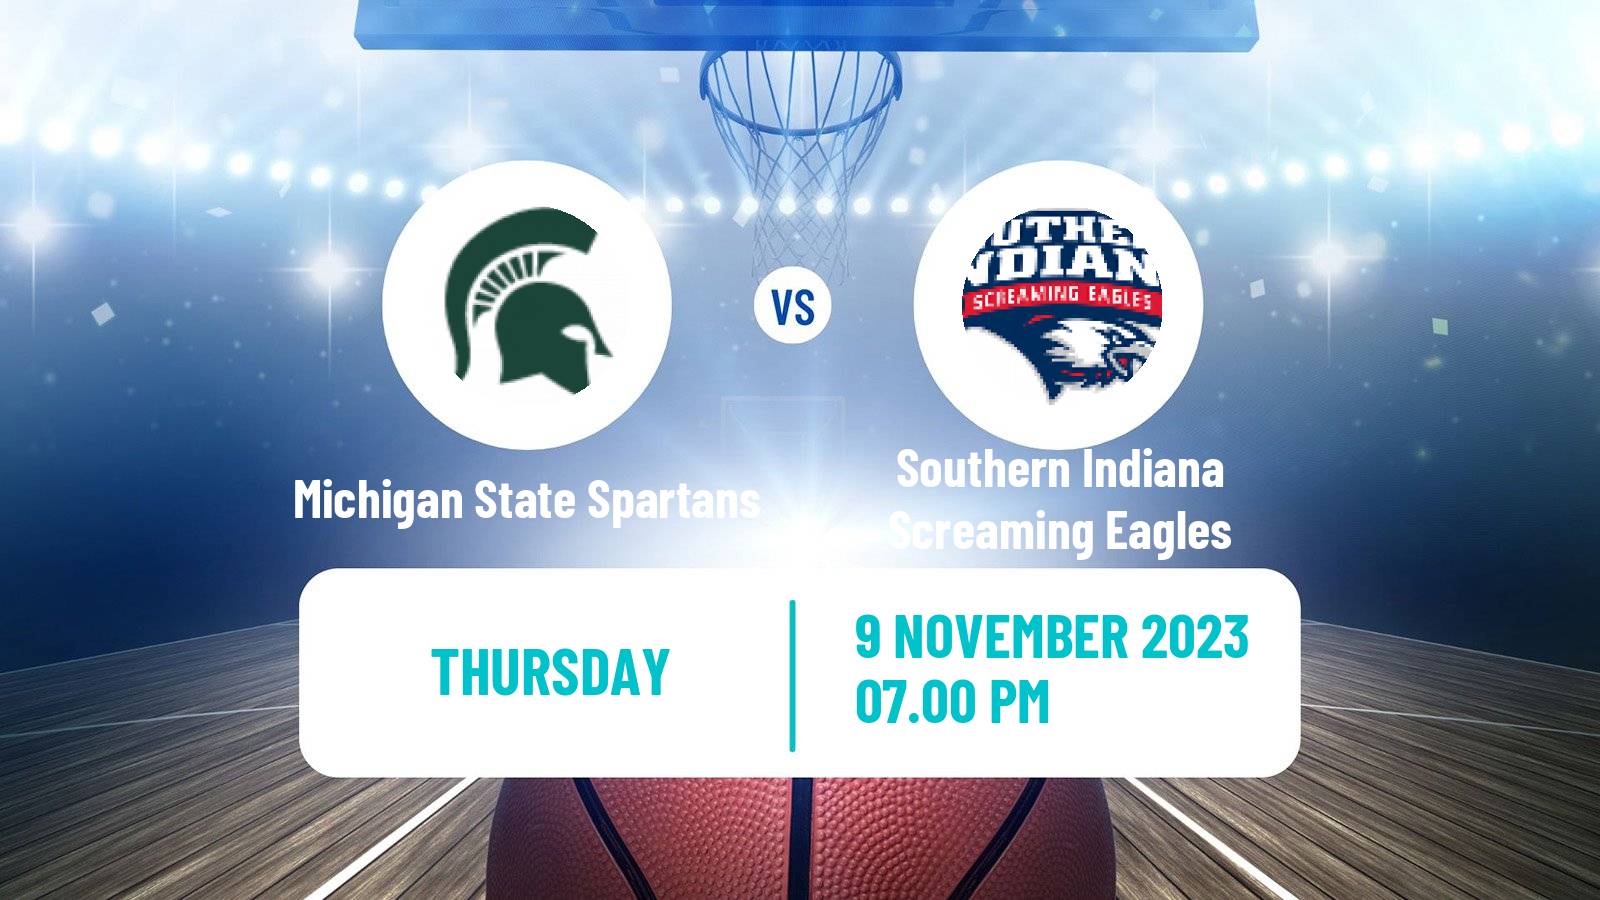 Basketball NCAA College Basketball Michigan State Spartans - Southern Indiana Screaming Eagles